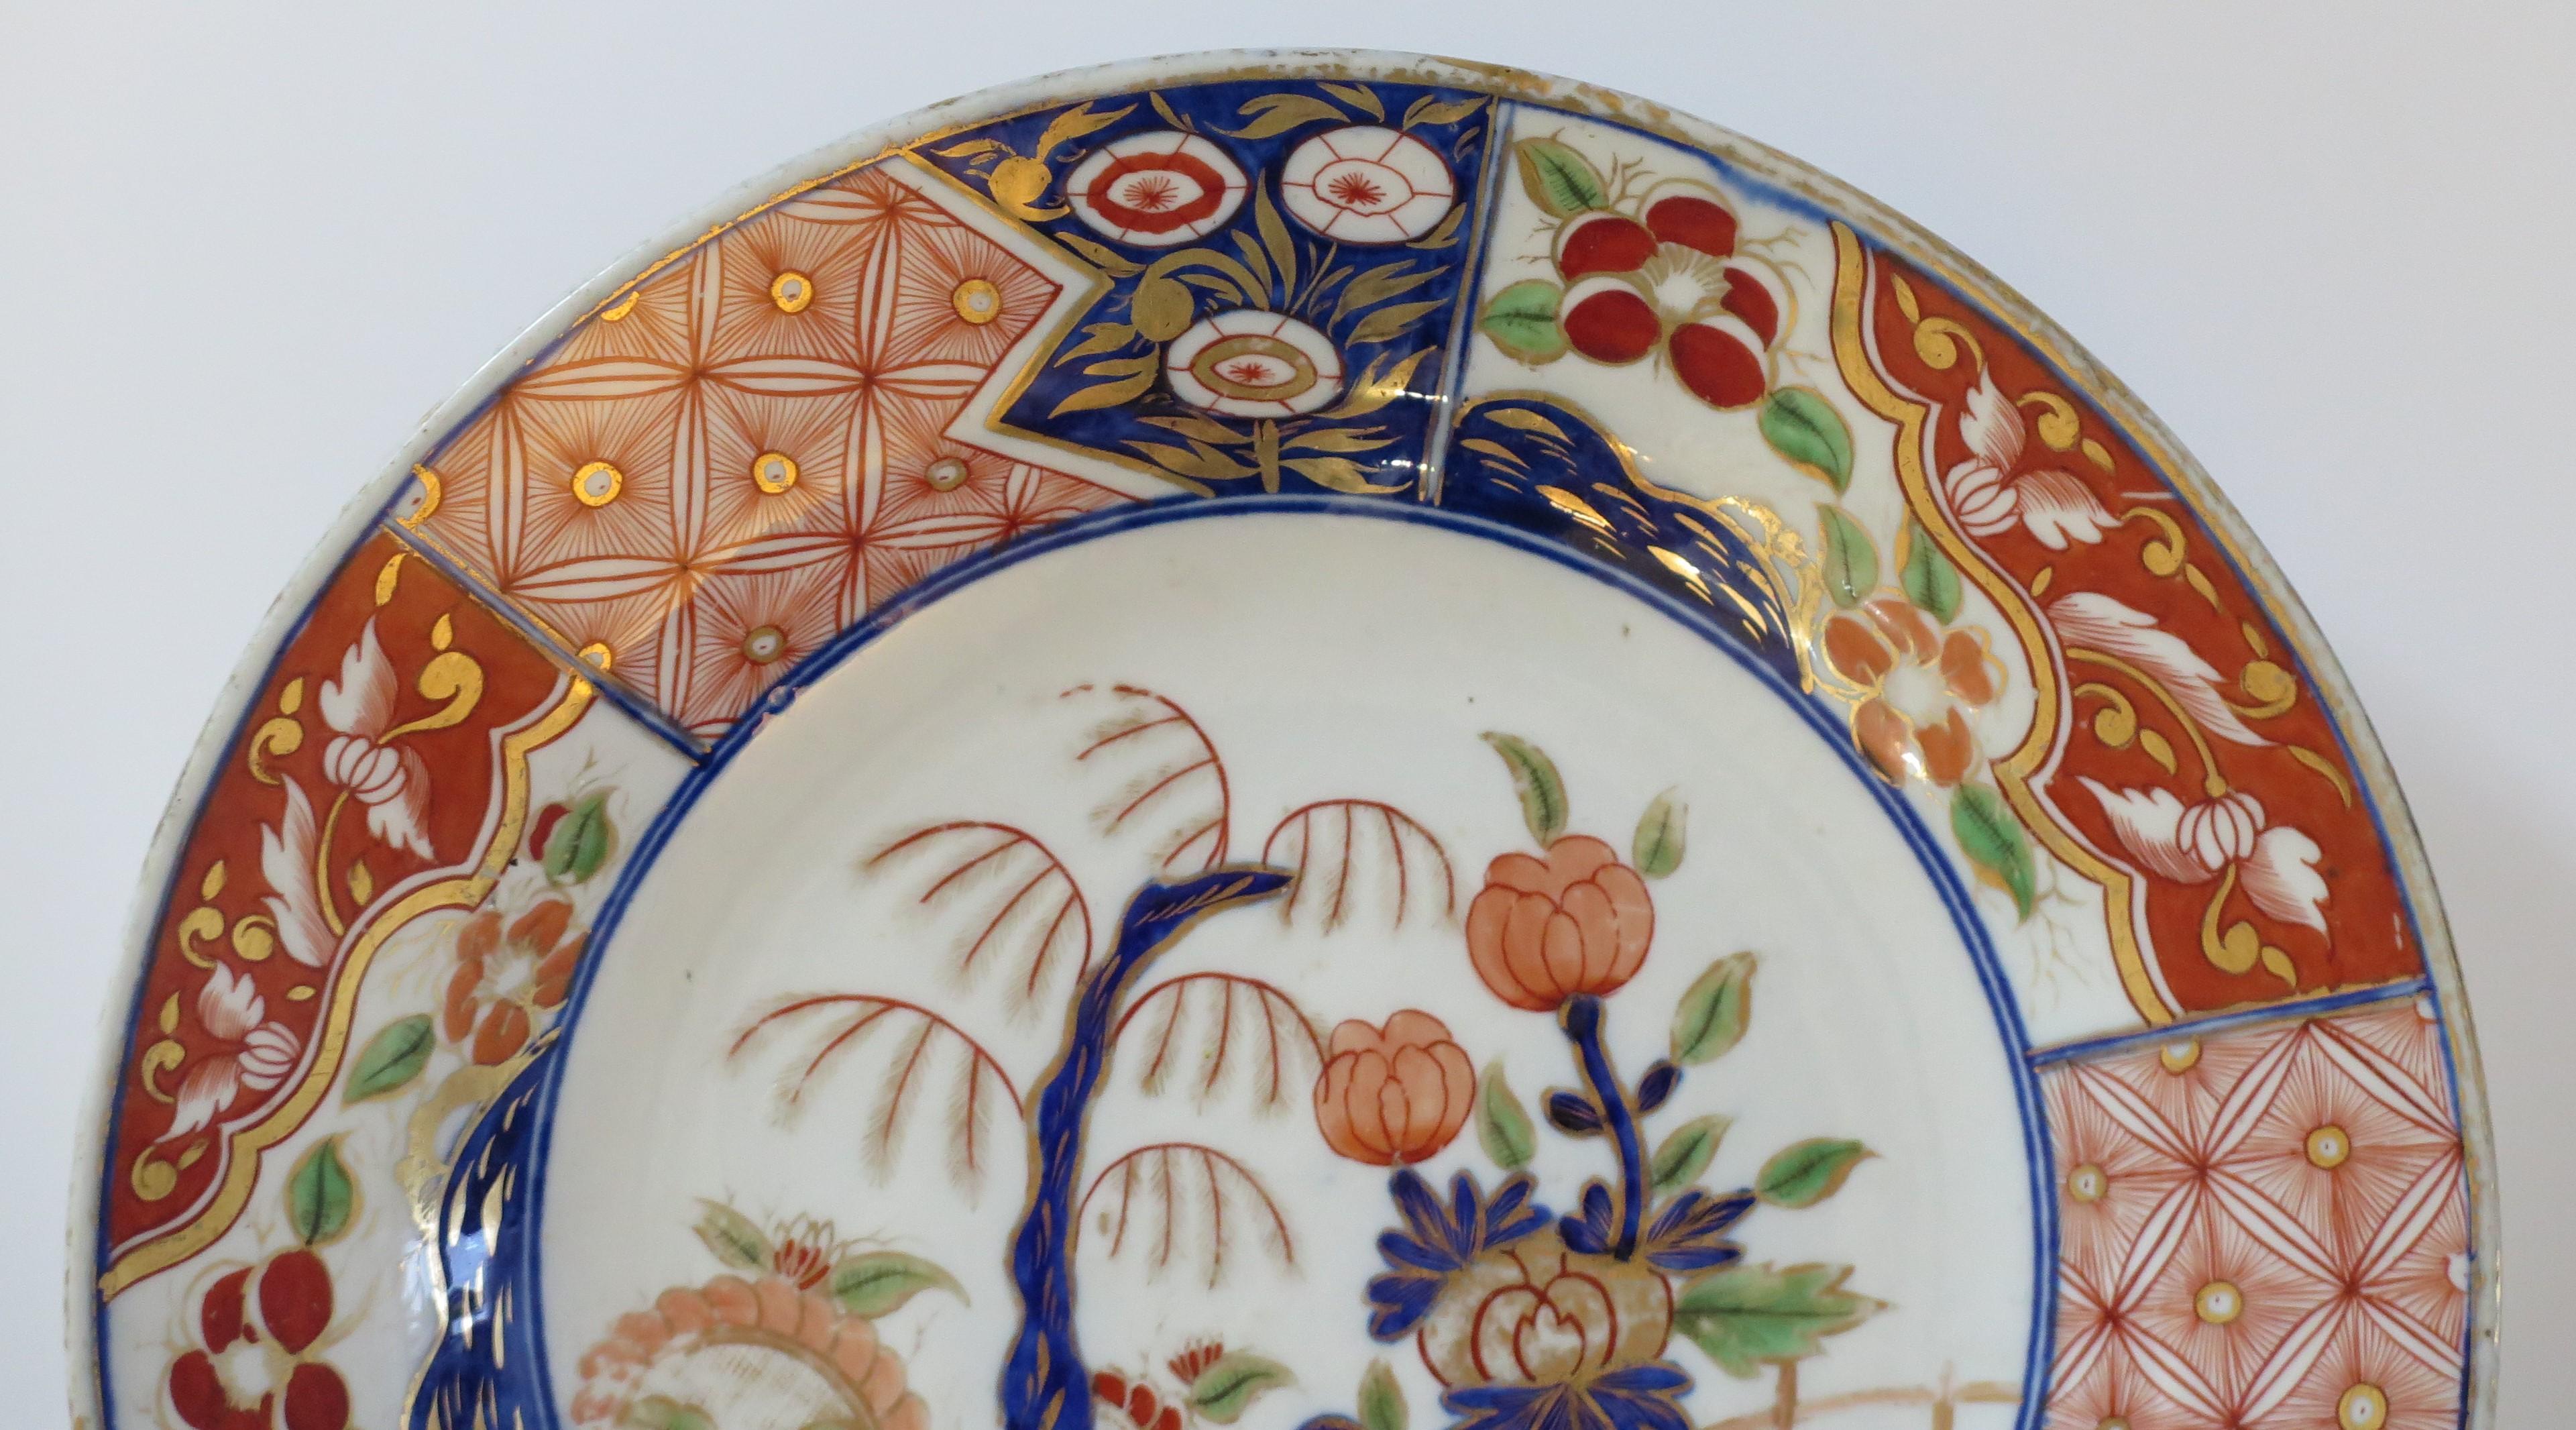 This is a good quality Japanese porcelain plate or dish, which we date to the Edo period, circa 1840. 

The plate is beautifully hand decorated with varying shades of under-glaze cobalt blue, then hand enameled with blue, green, red and burnt